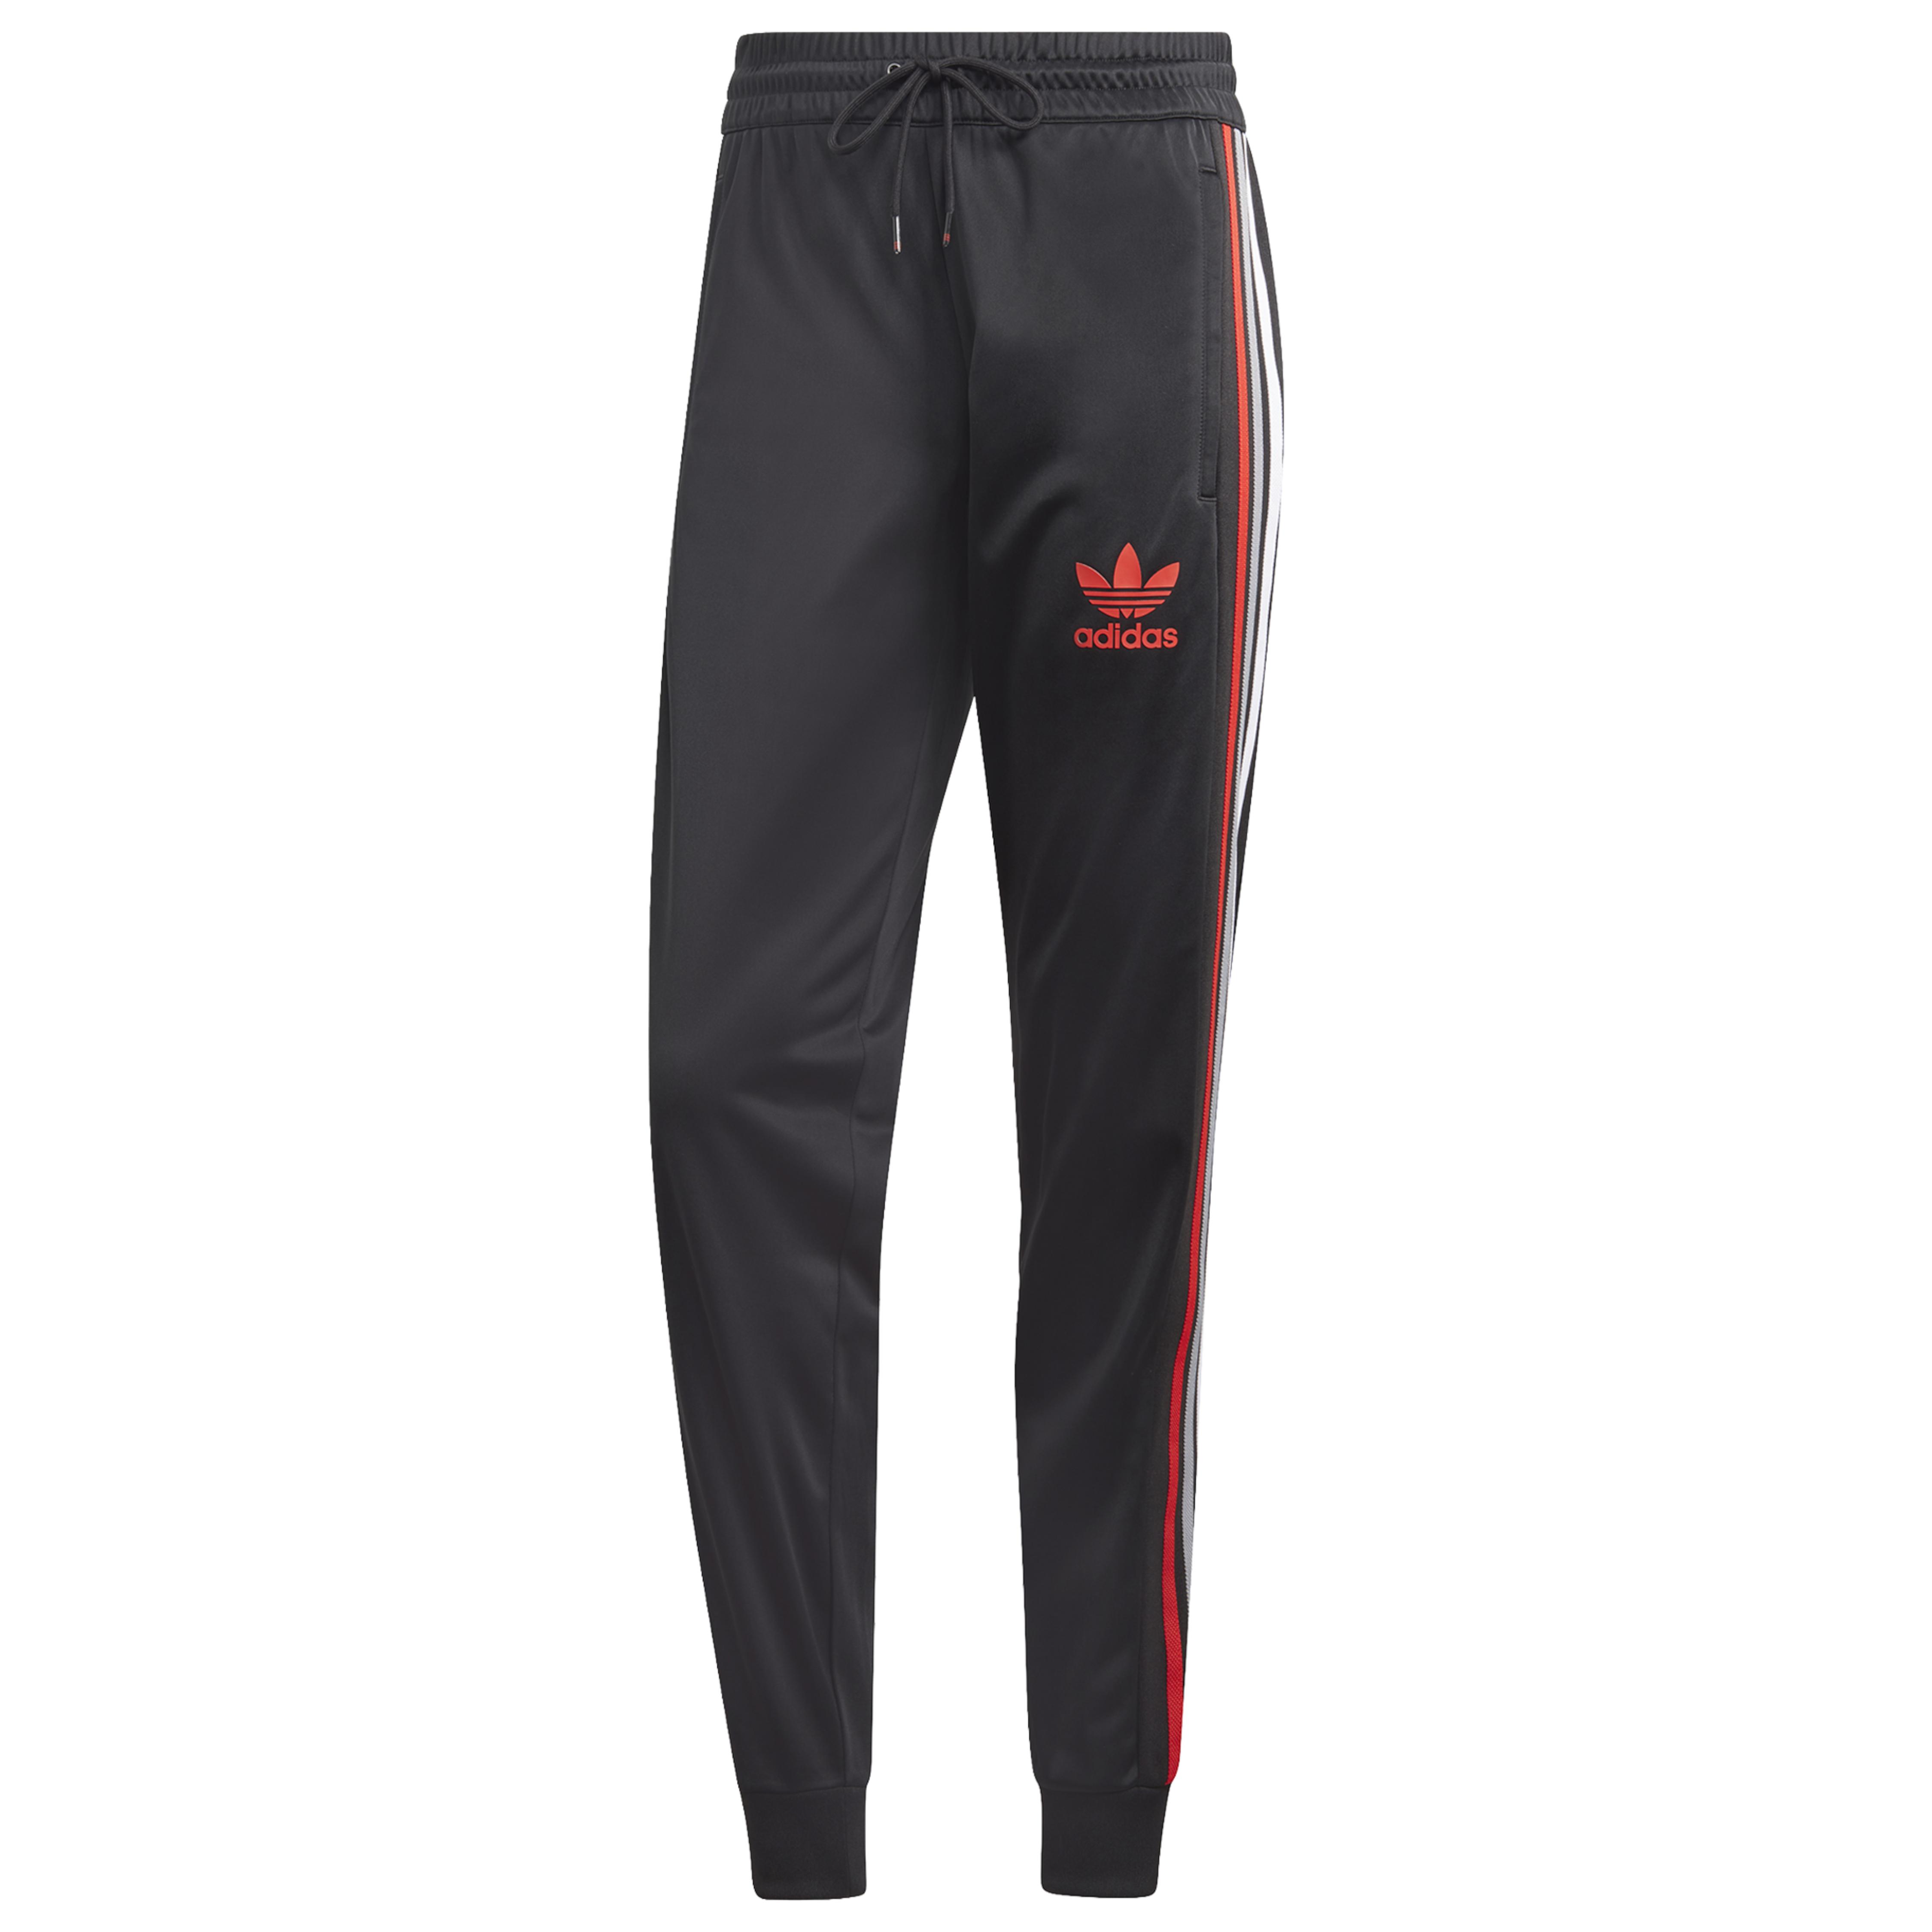 adidas Originals Synthetic Chile 20 Track Pants in Black/Red (Black) for  Men - Lyst